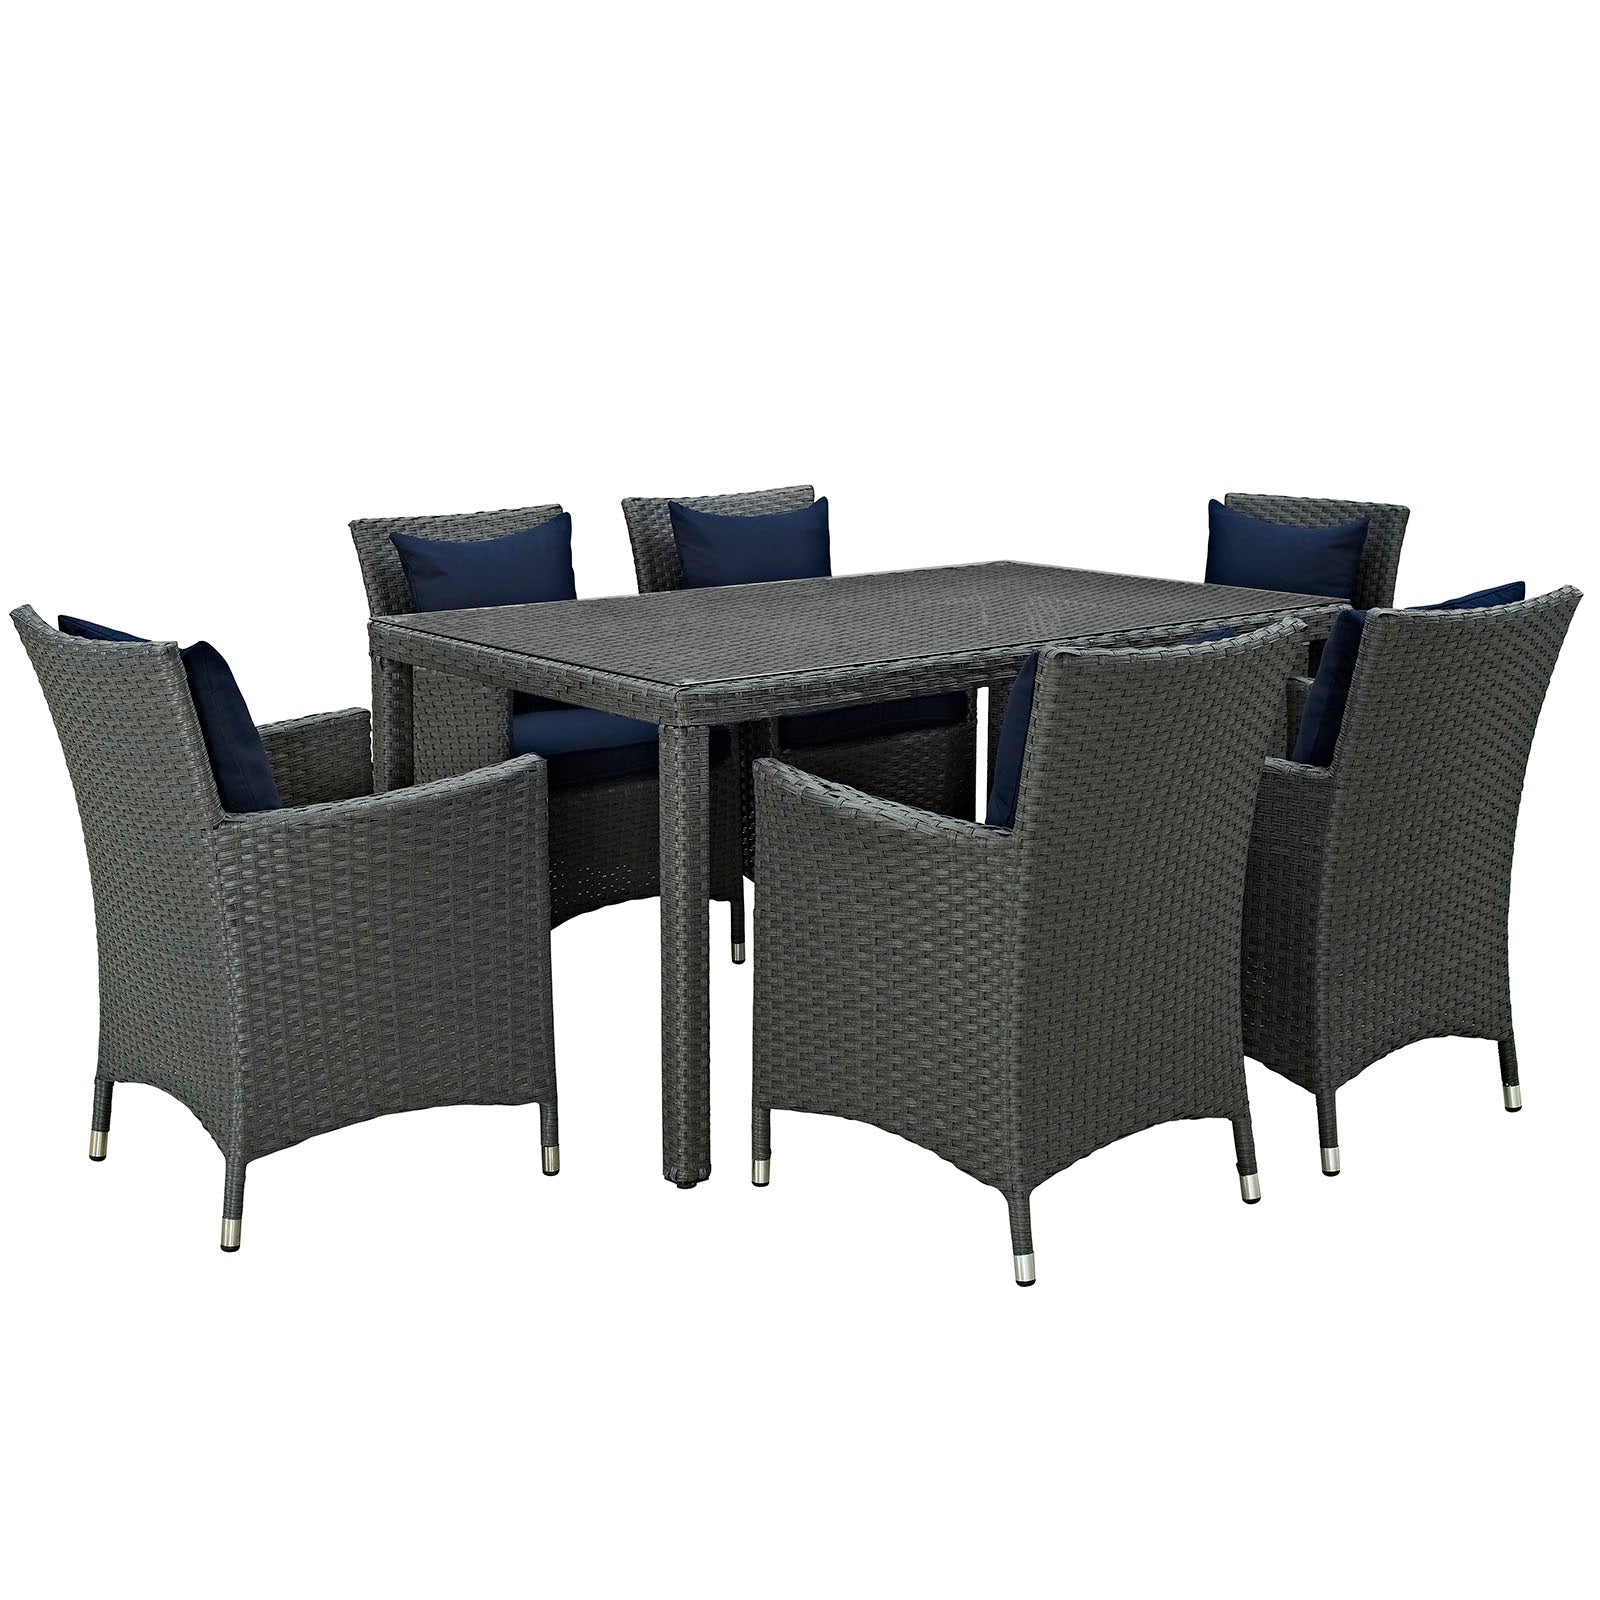 Modway Outdoor Dining Sets - Sojourn 7 Piece Outdoor Patio Sunbrella Dining Set Canvas Navy